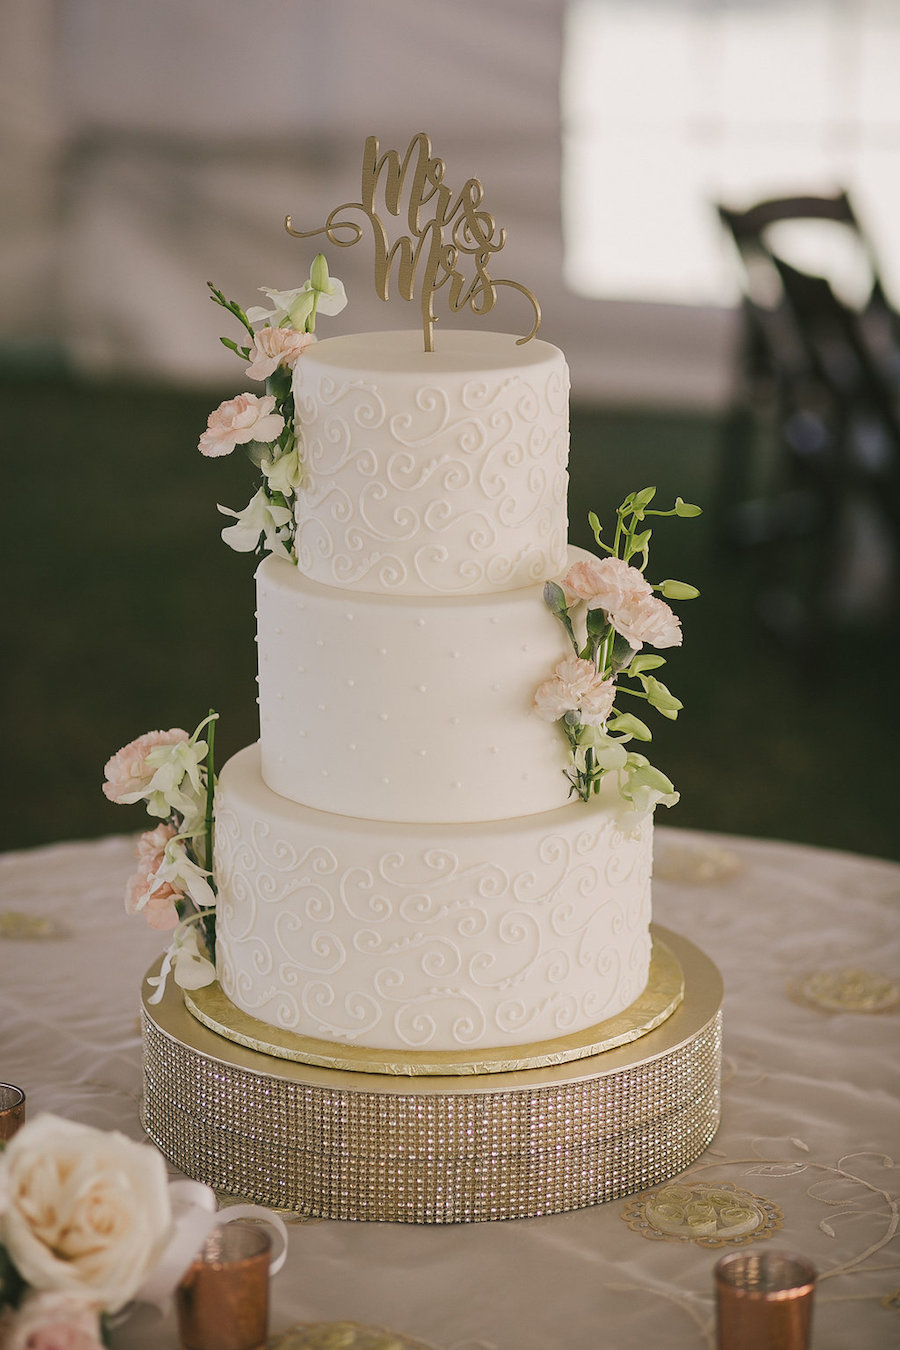 Elegant, Traditional White Three Tier Round Wedding Cake with Mr. Mrs Cake Topper and Blush Pink Flowers